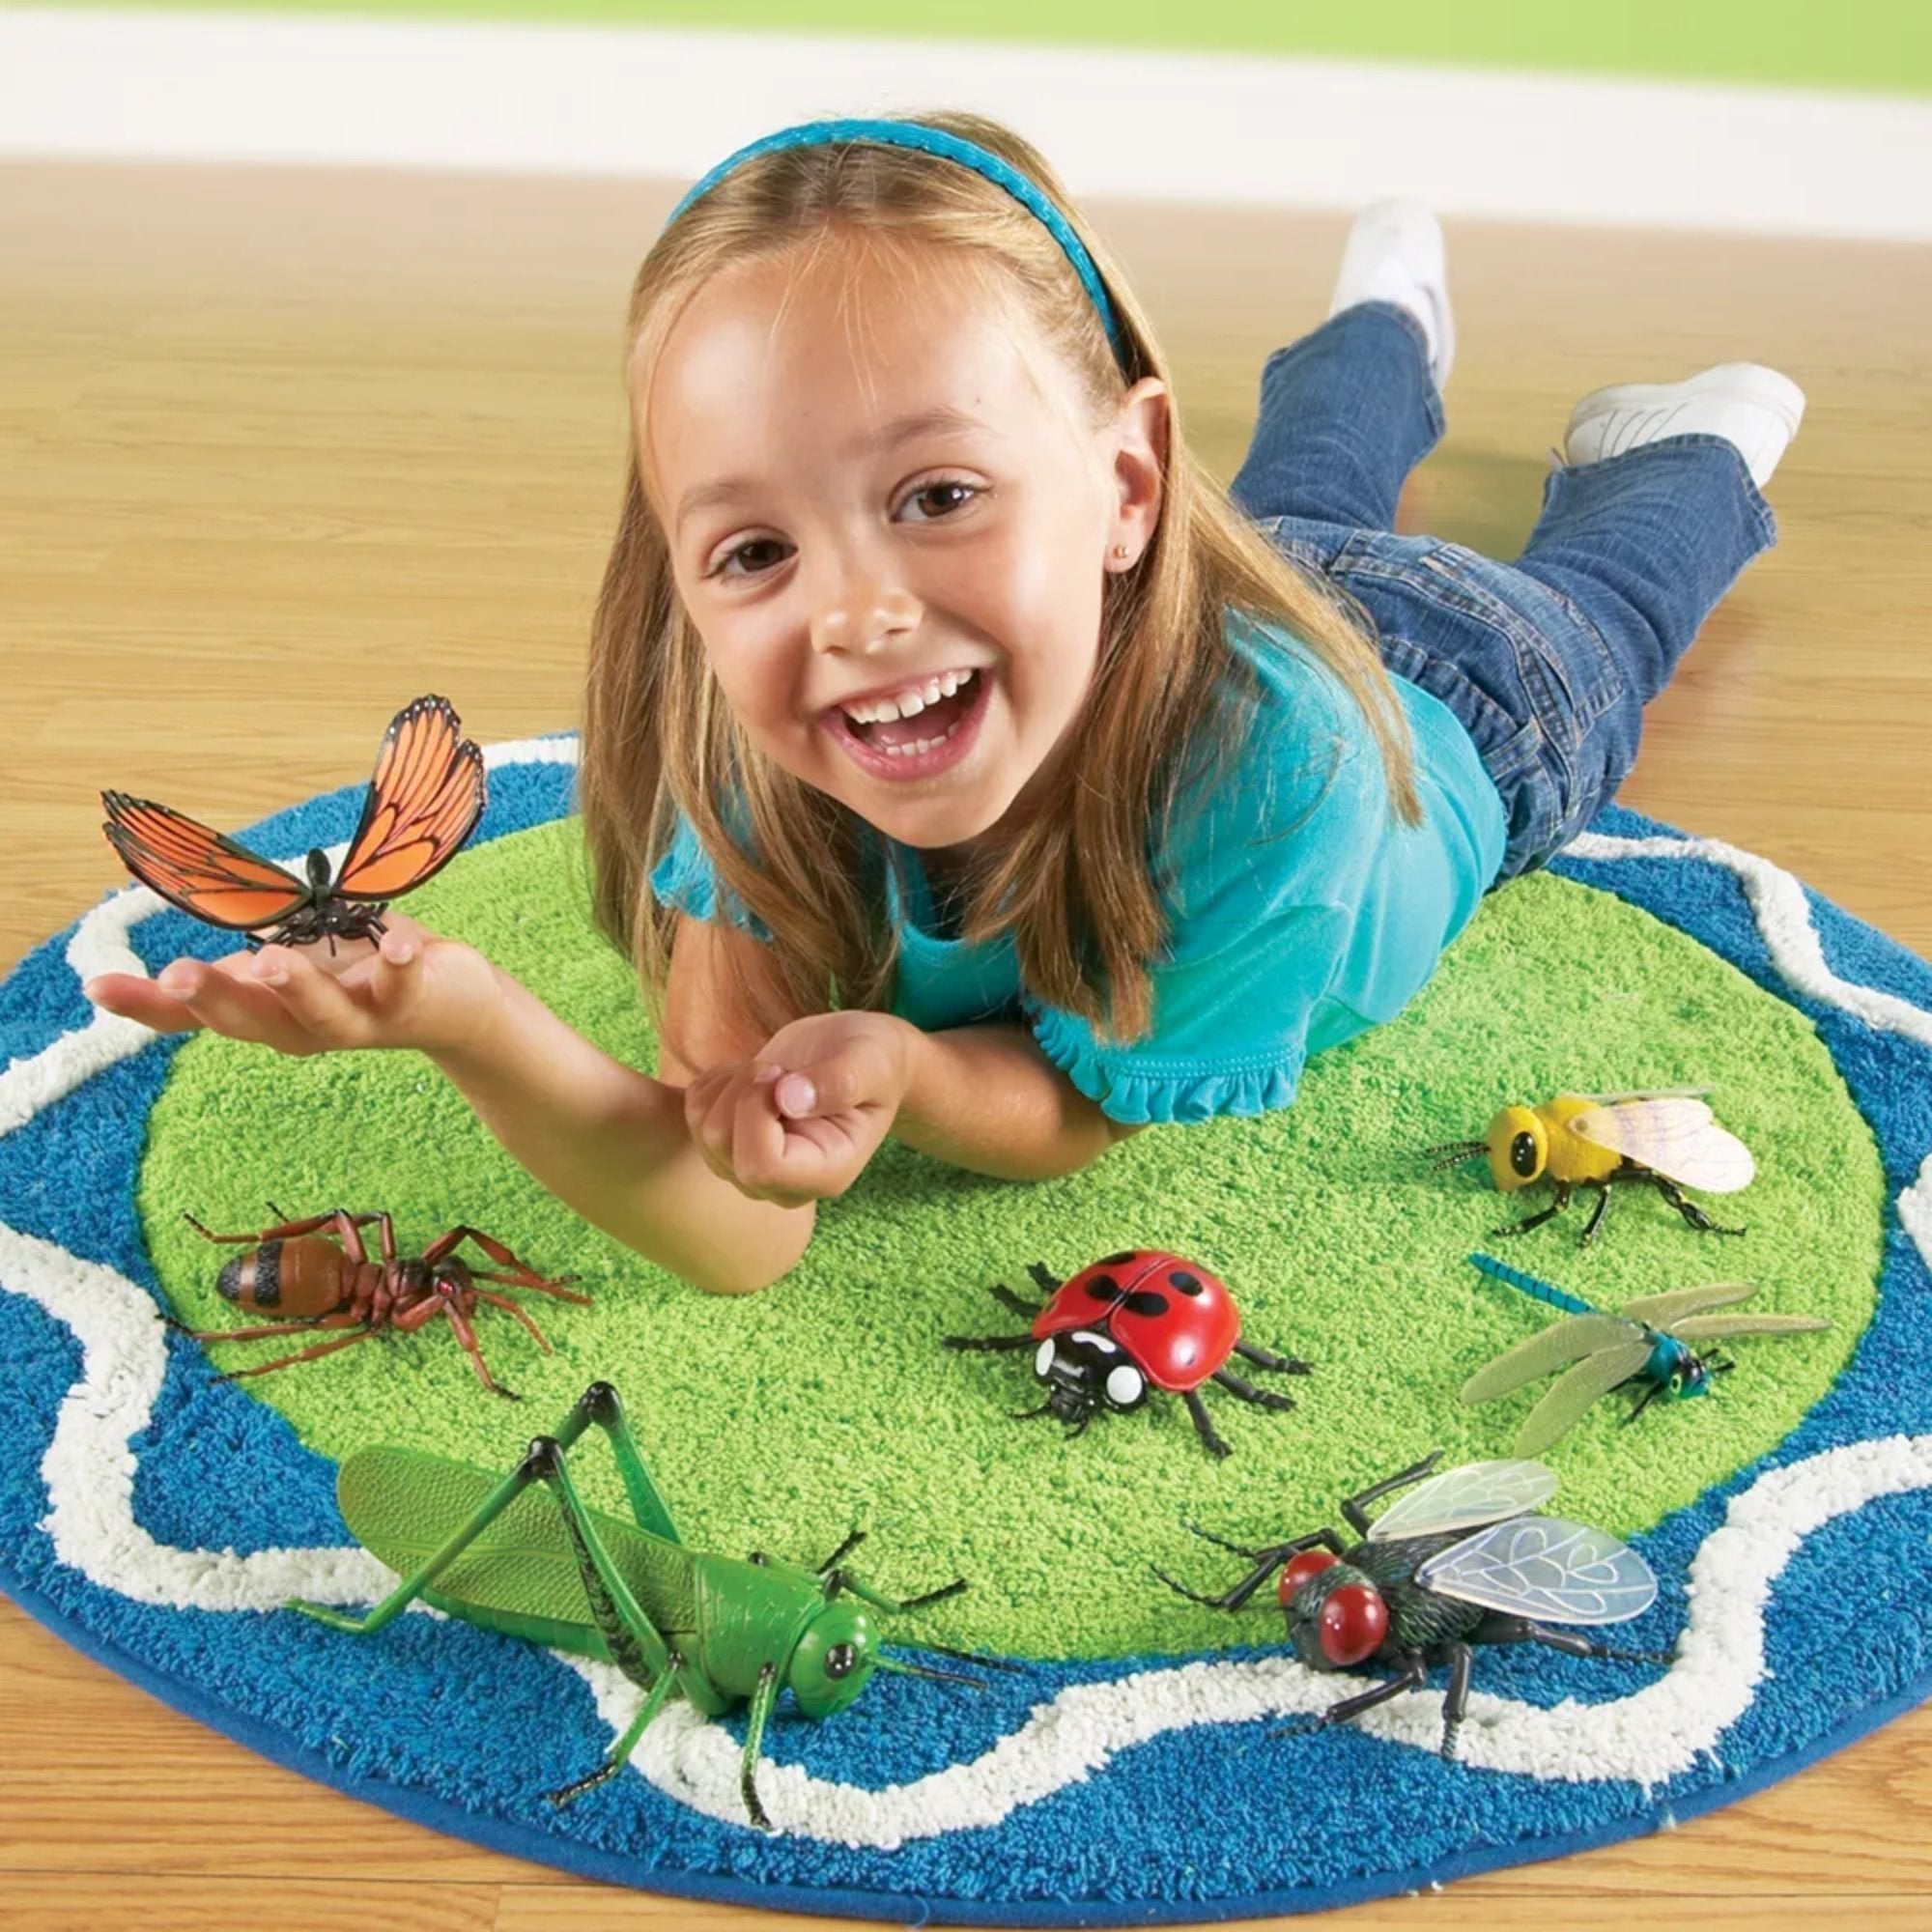 Jumbo Insects, Introducing our Jumbo Insects set - the perfect way for your class to explore the world of insects without needing any magnification equipment! With stunningly realistic details, this set is ideal for children who love imaginative play, early science exploration, or learning about different species.The Jumbo Insects set includes seven jumbo insects: a fly, ant, bee, ladybird, grasshopper, butterfly, and dragonfly. Children will love examining each insect in detail, learning about their unique